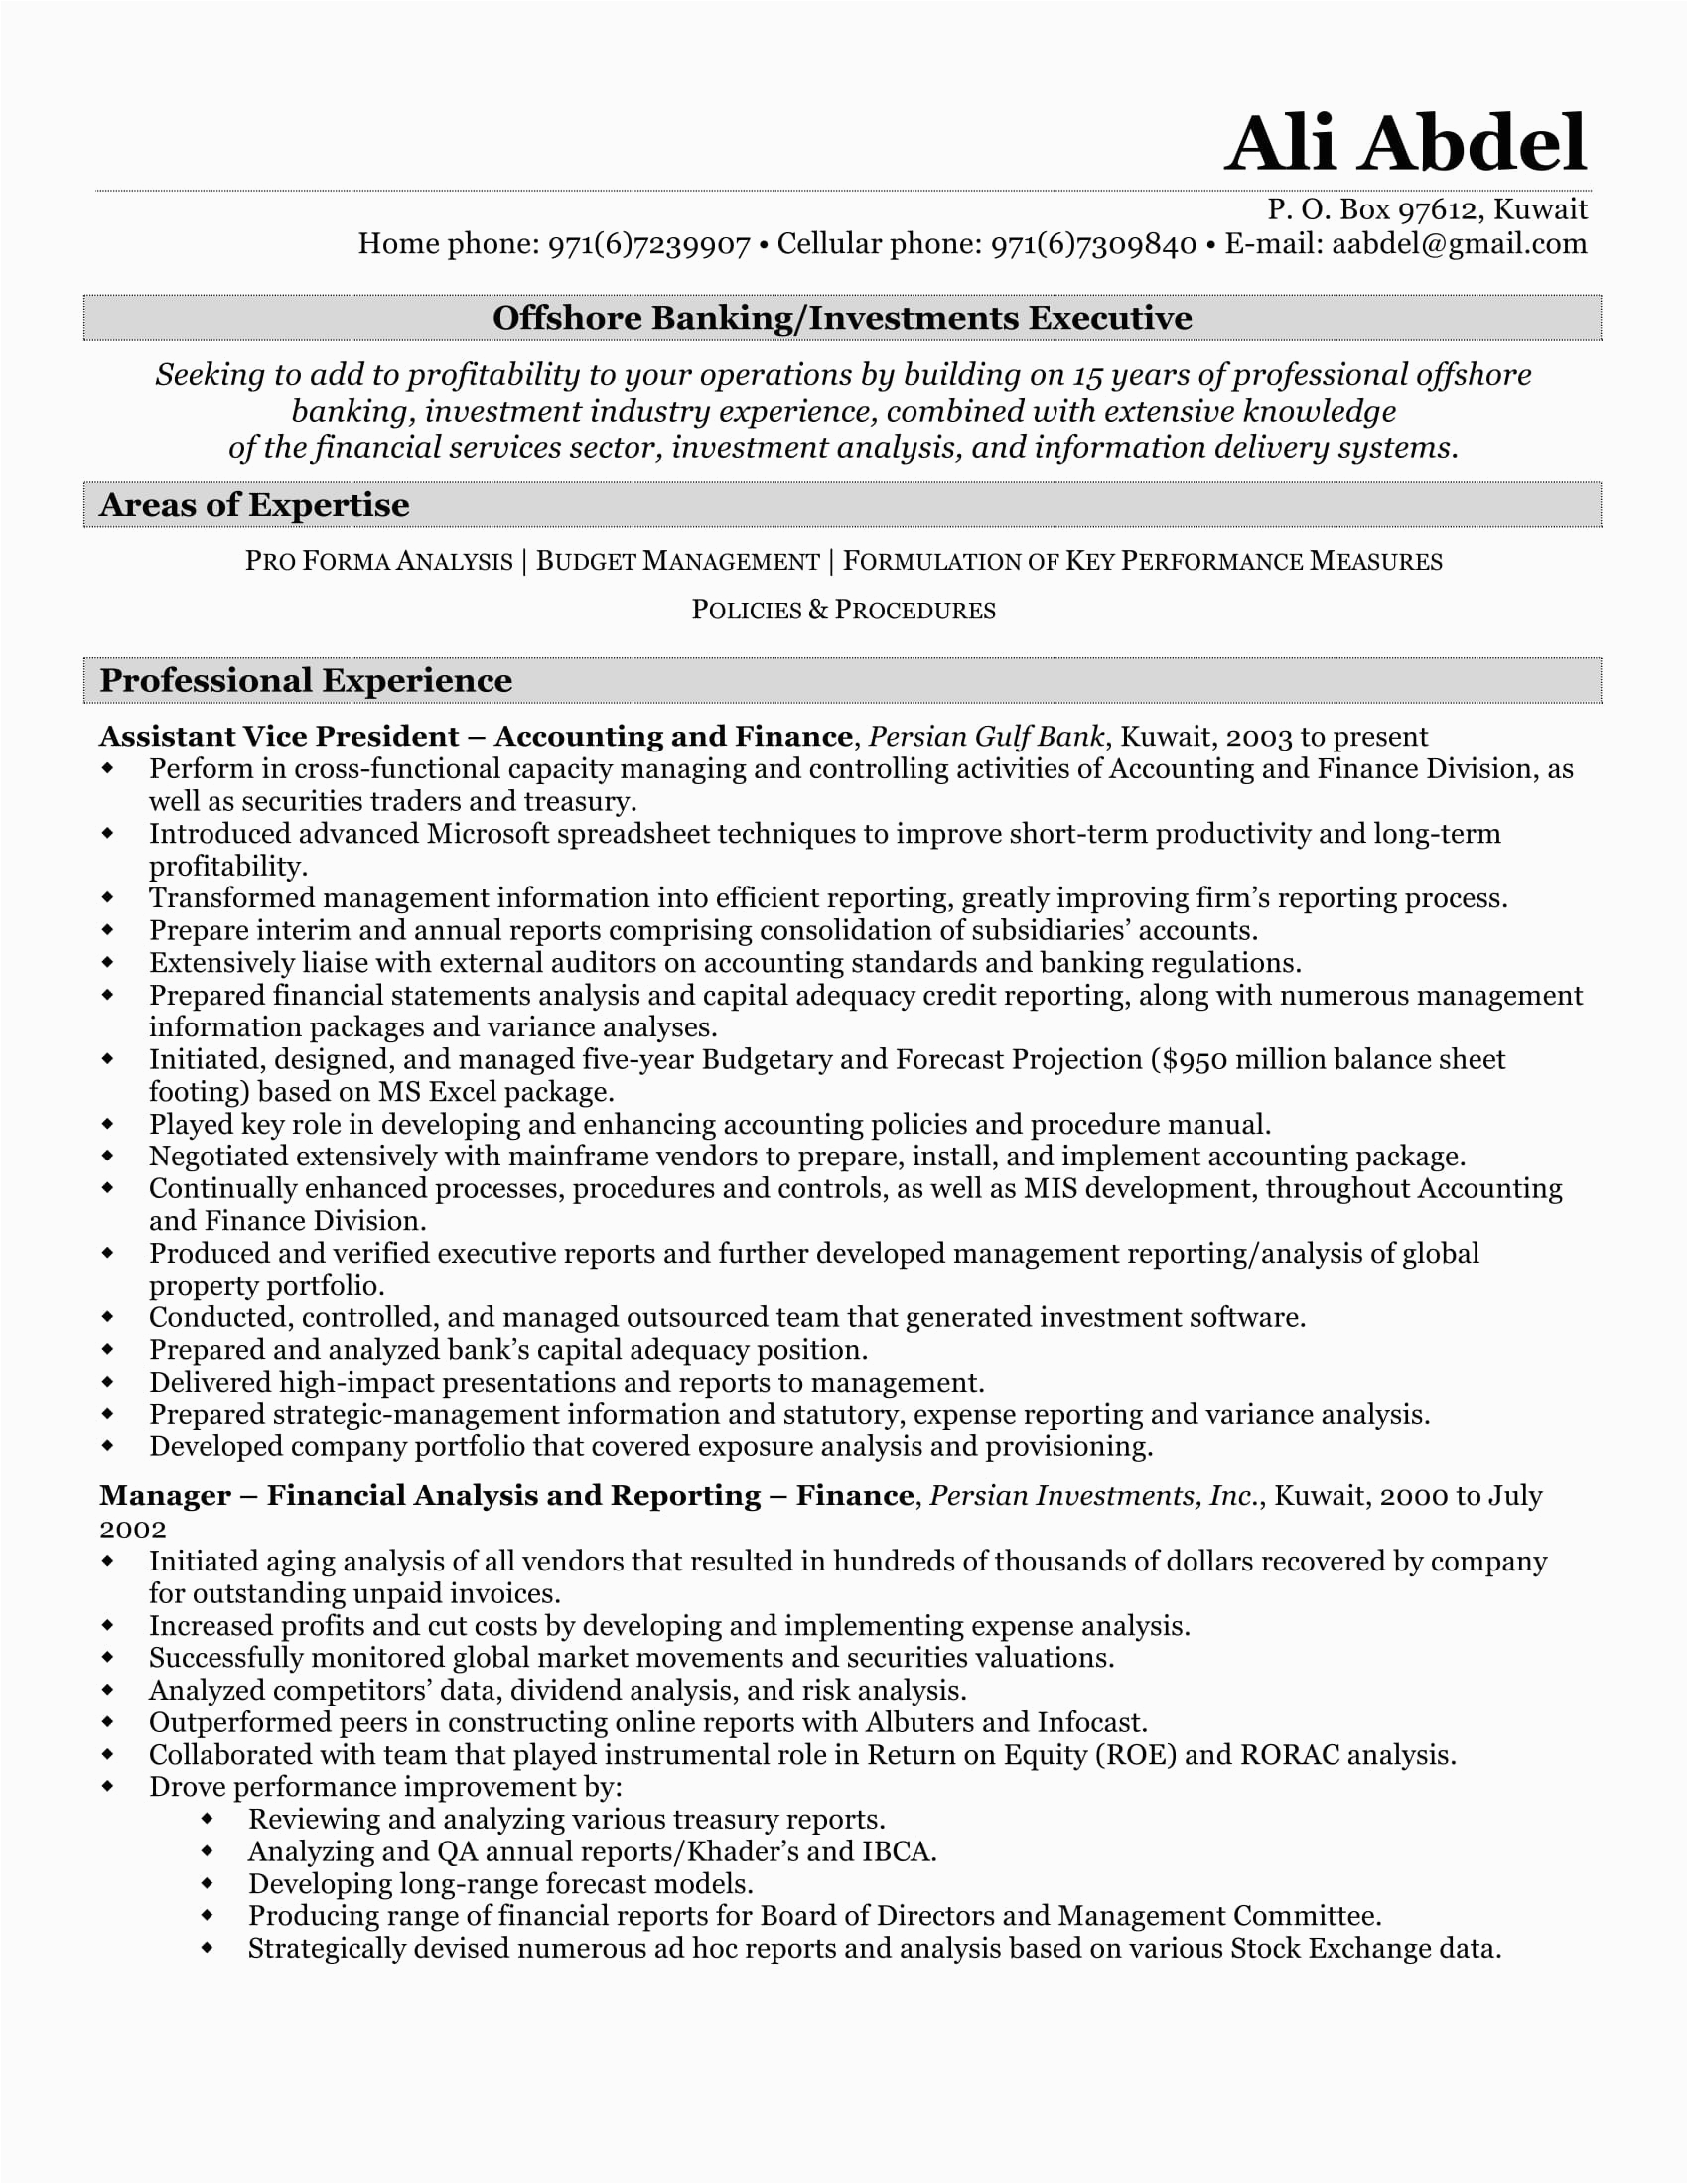 Achievement Based Resume and Sample and Ceo 24 Best Sample Executive Resume Templates Wisestep